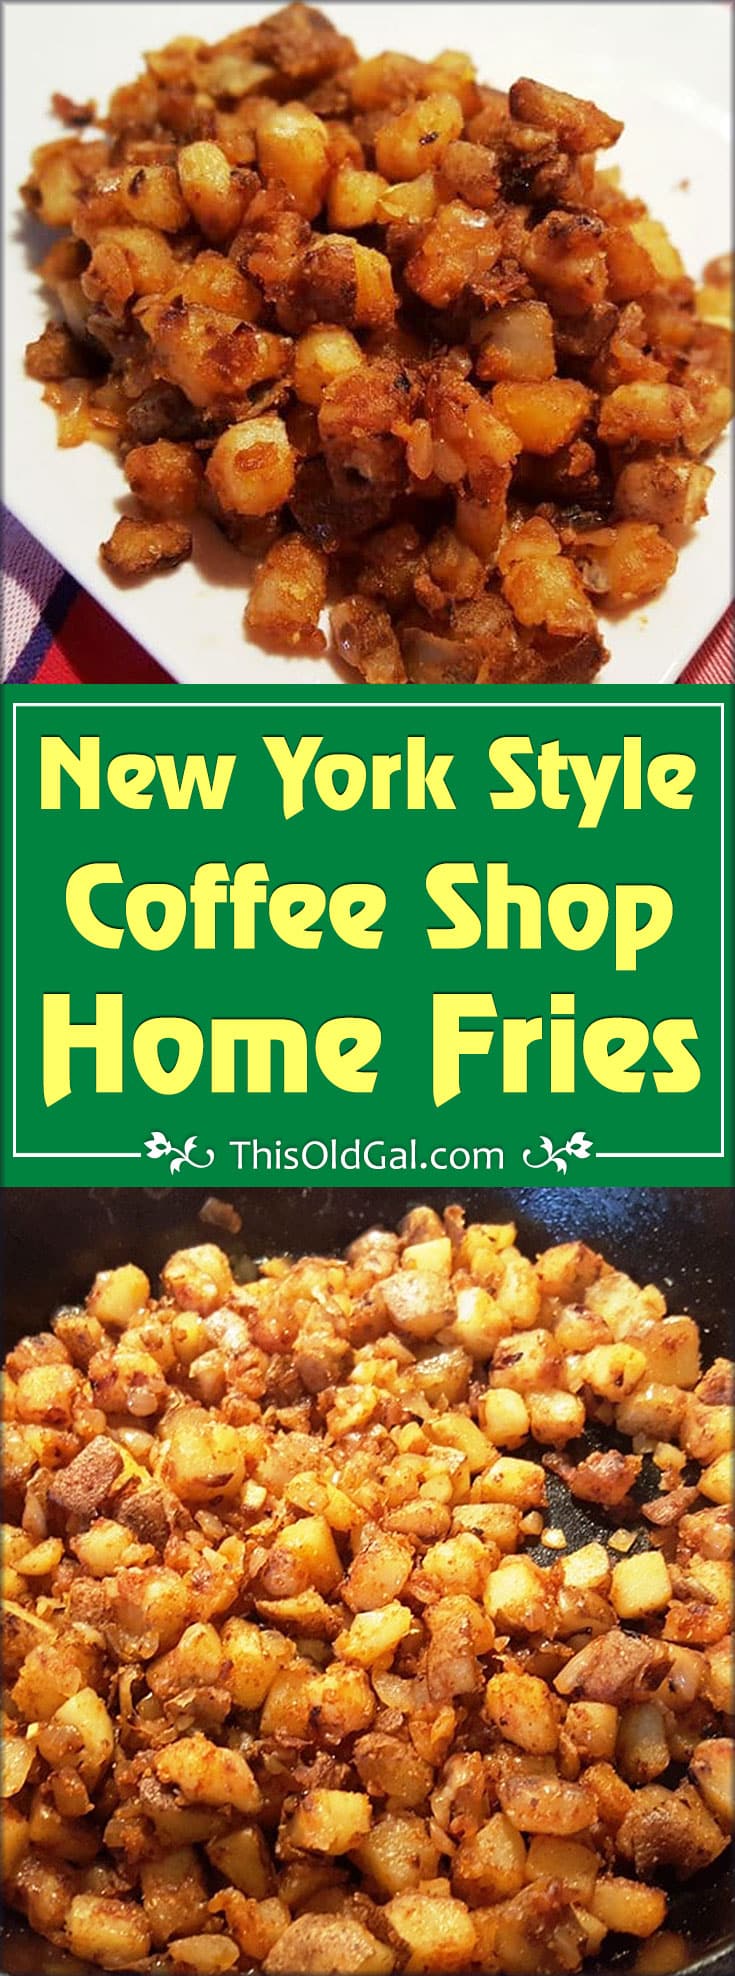 New York Style Coffee Shop Home Fries (Greasy Spoon Fried Potatoes)